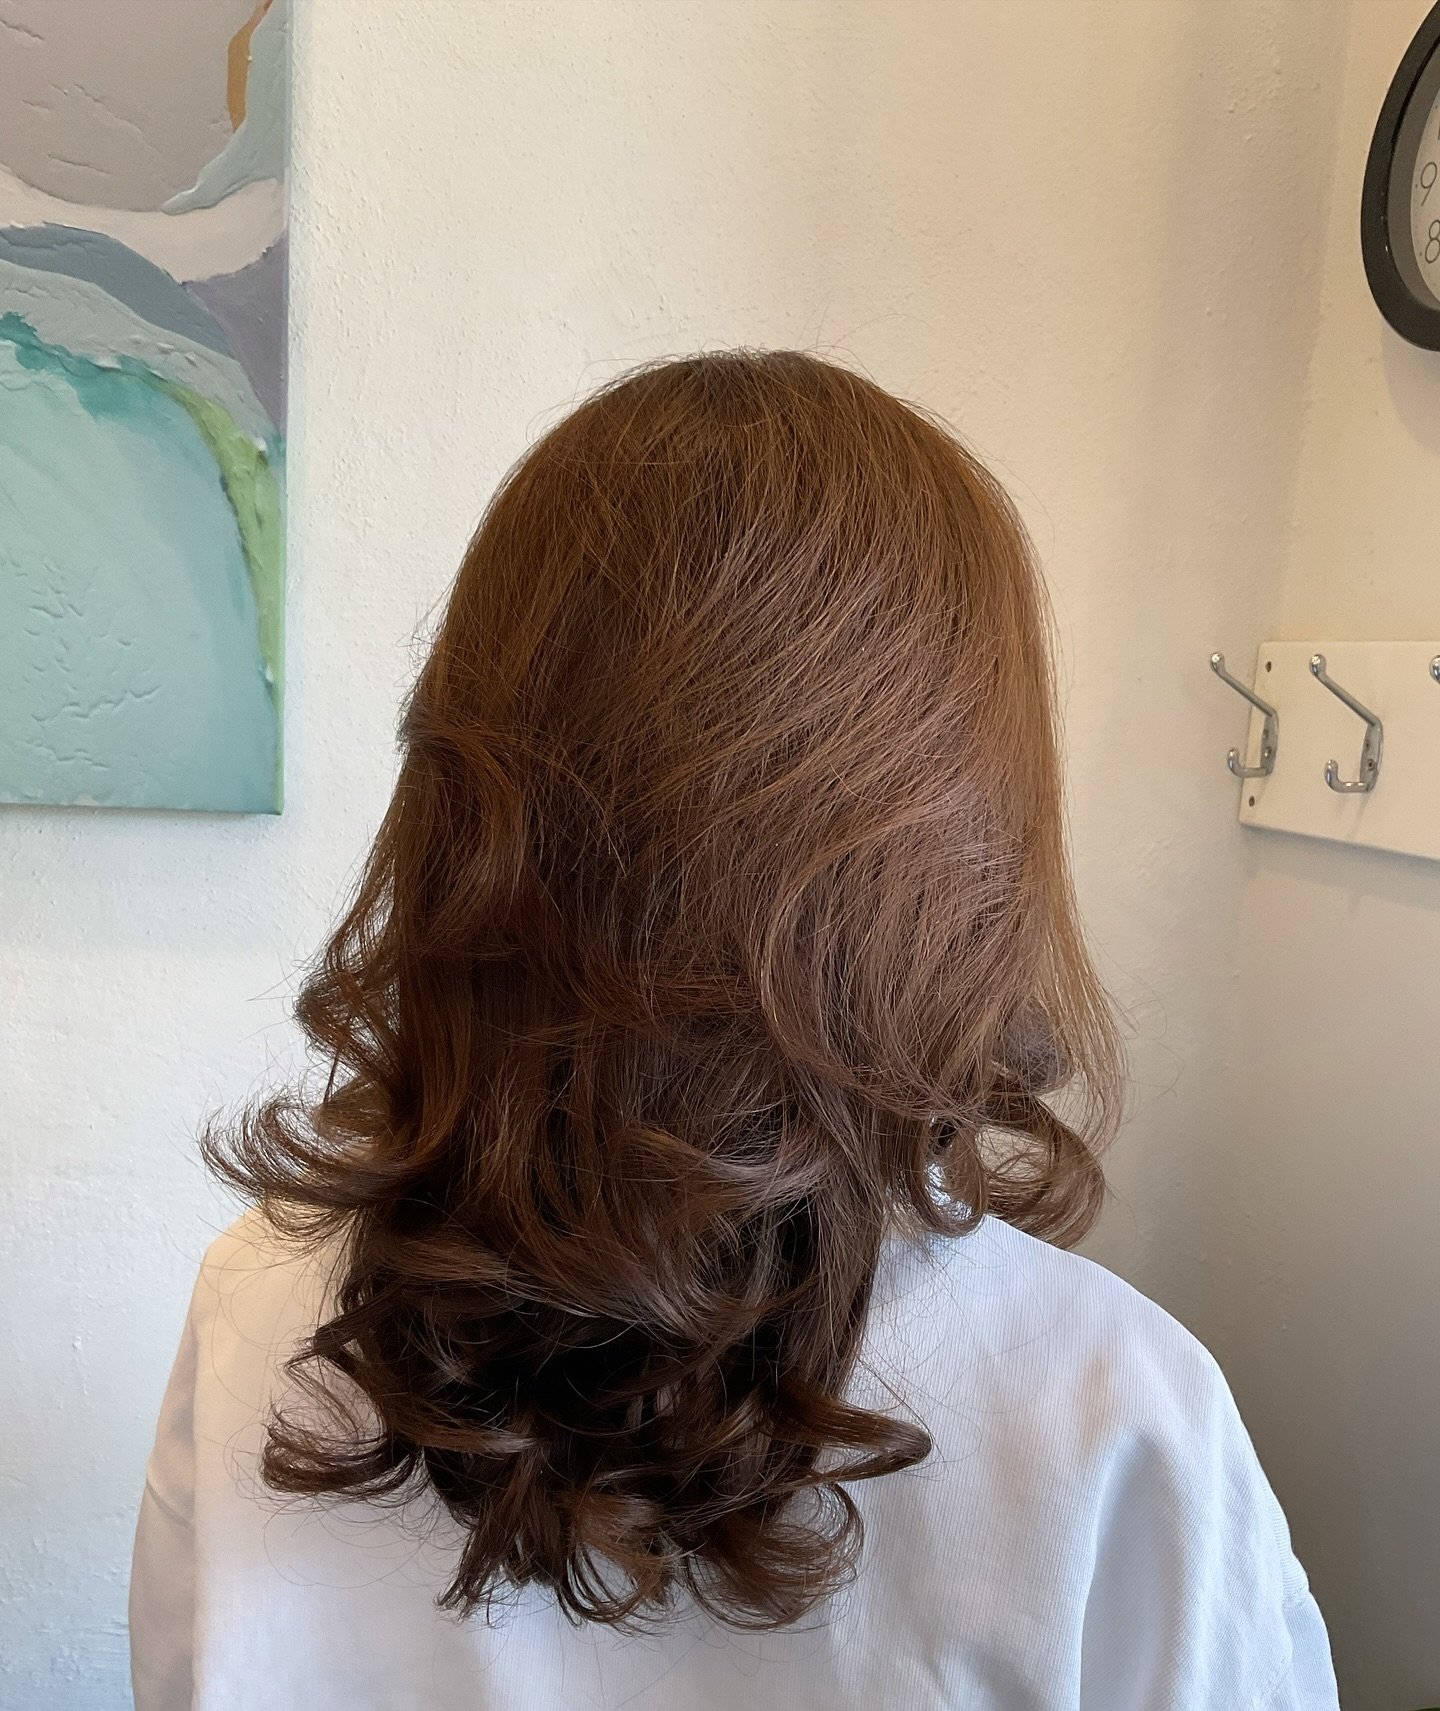 Who doesn&rsquo;t love a fresh bouncy blowdry? At Le Chic we love pampering our clients and making feel you glamorous 💕✨ #perthmobilehairdresser
#perthhair
#perthhairstylist
#perthhairstyling
#perthmobilehairdresser
#blowdryqueen
#blowdrystyle
#pert